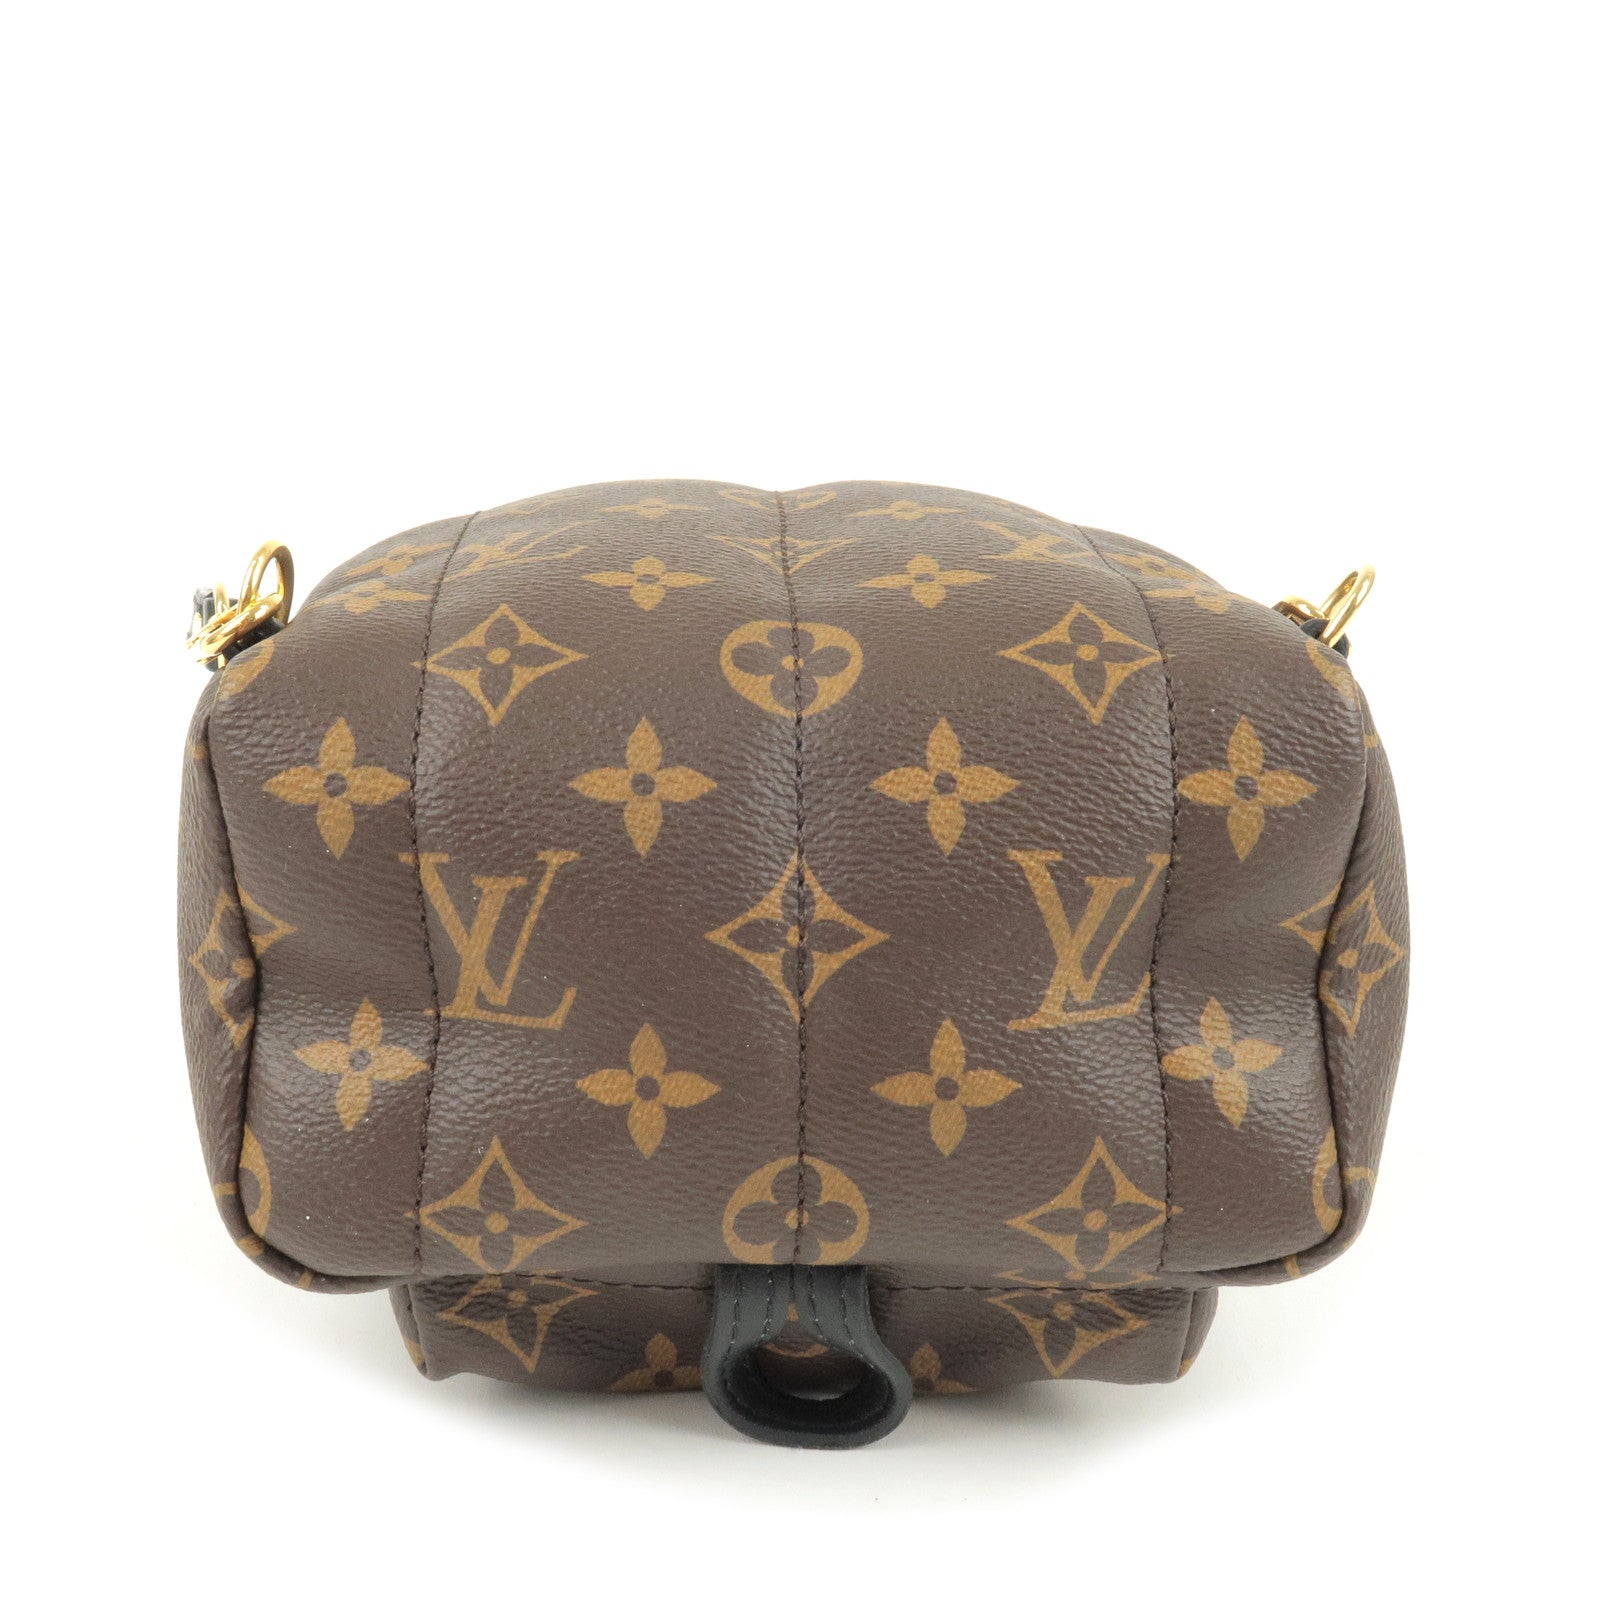 LOUIS VUITTON PALM SPRINGS MINI BACKPACK/CROSSBODY MONOGRAM CANVAS/LEATHER